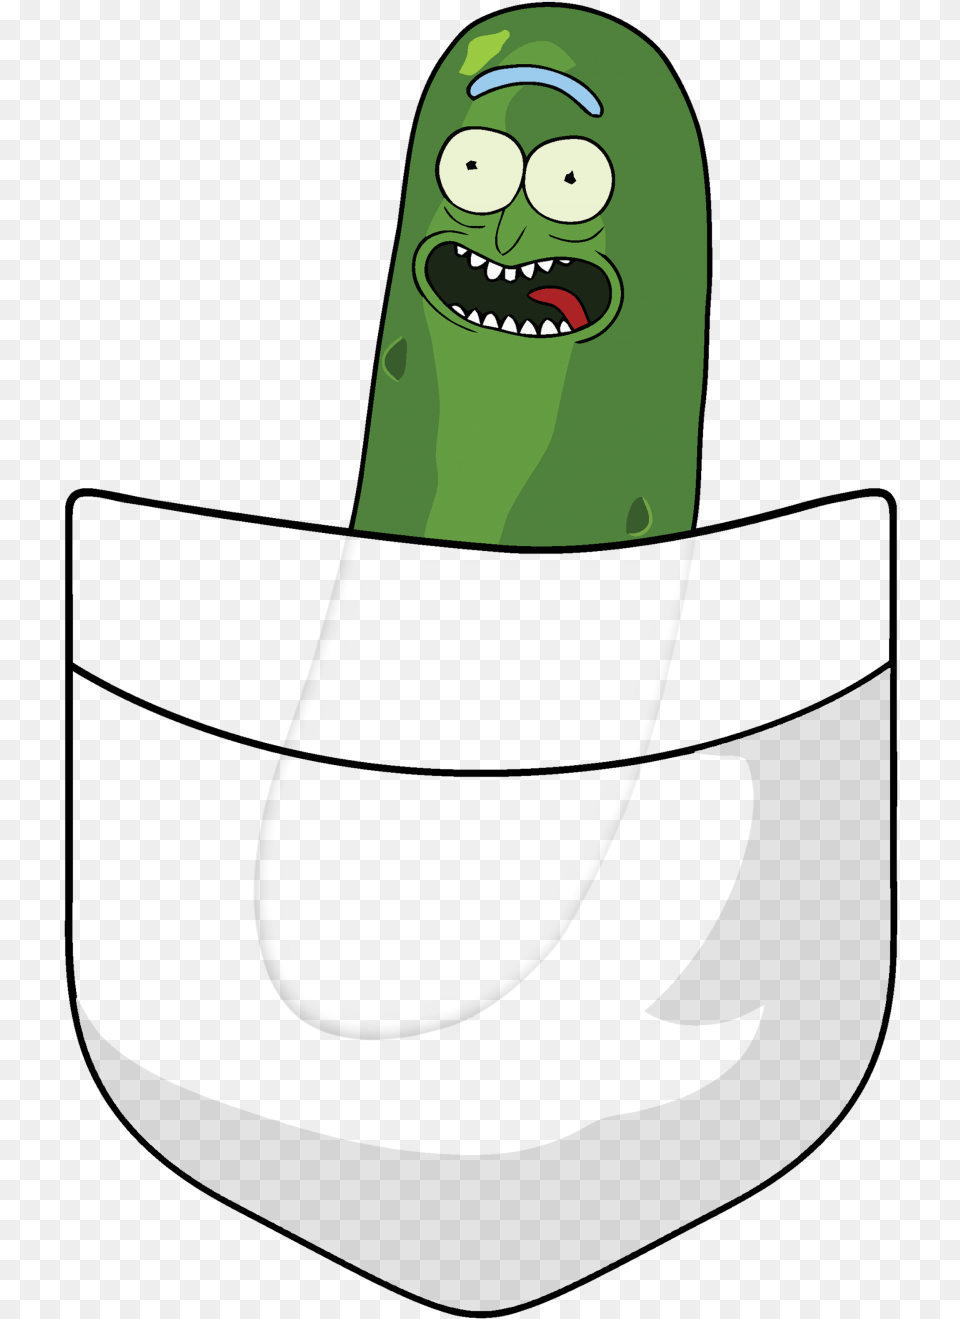 Pickle Rick In A Pocket, Cucumber, Food, Plant, Produce Png Image